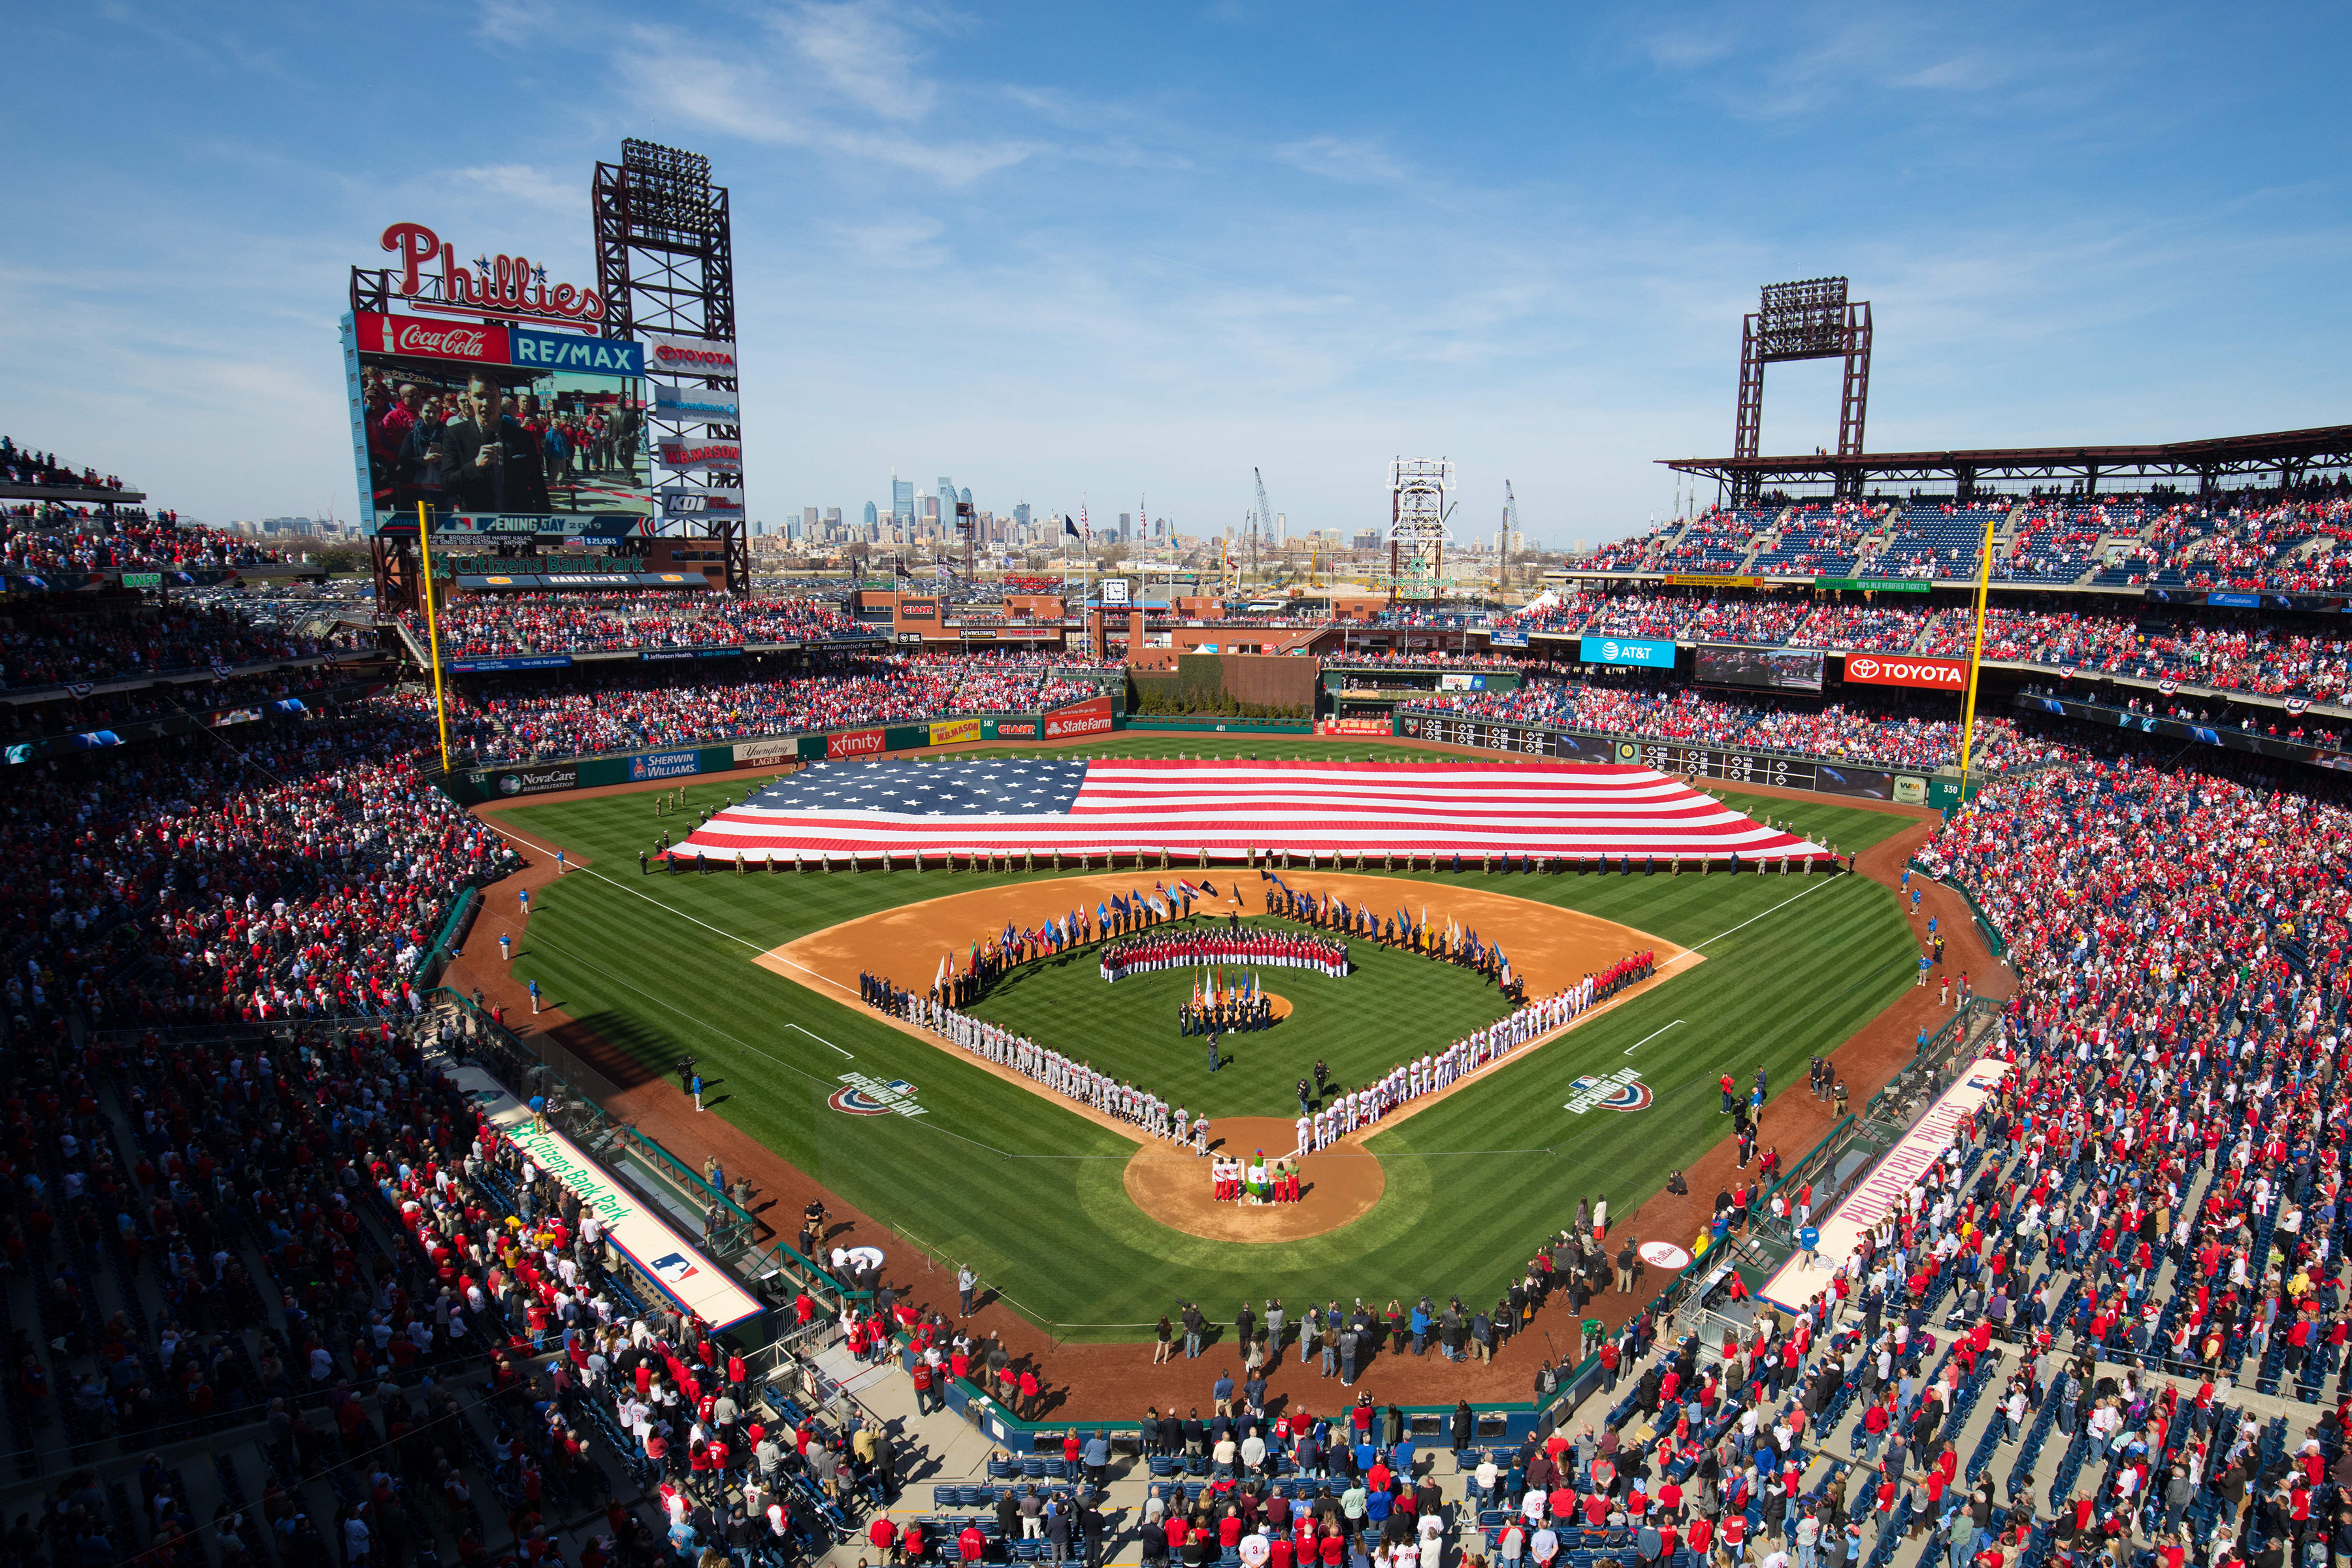 Forbes Ranks Phillies as 9th Most Valuable MLB Franchise